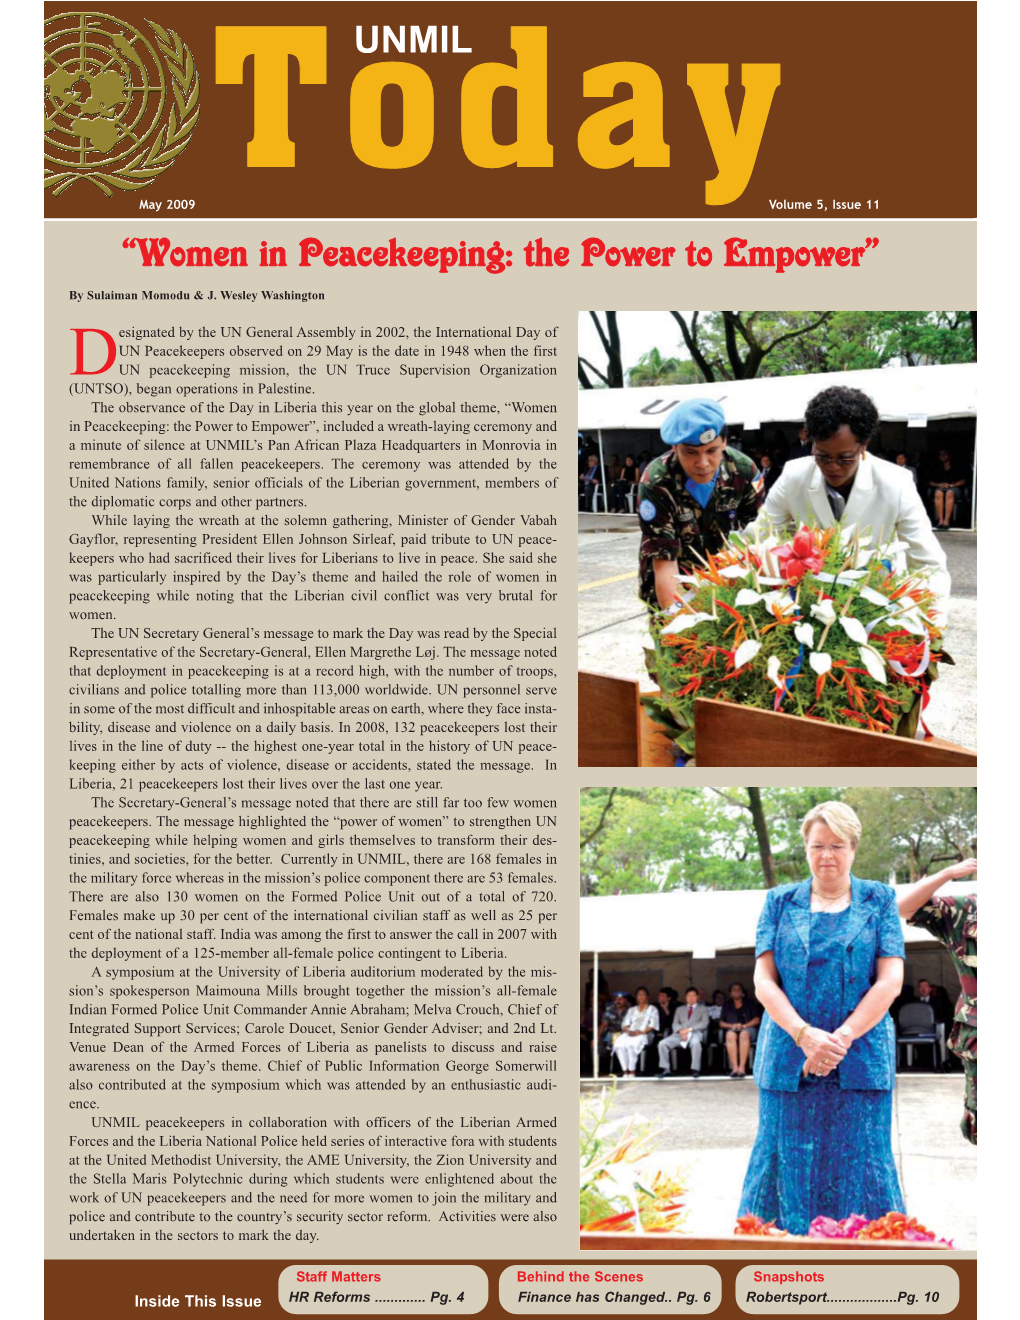 “Women in Peacekeeping: the Power to Empower”